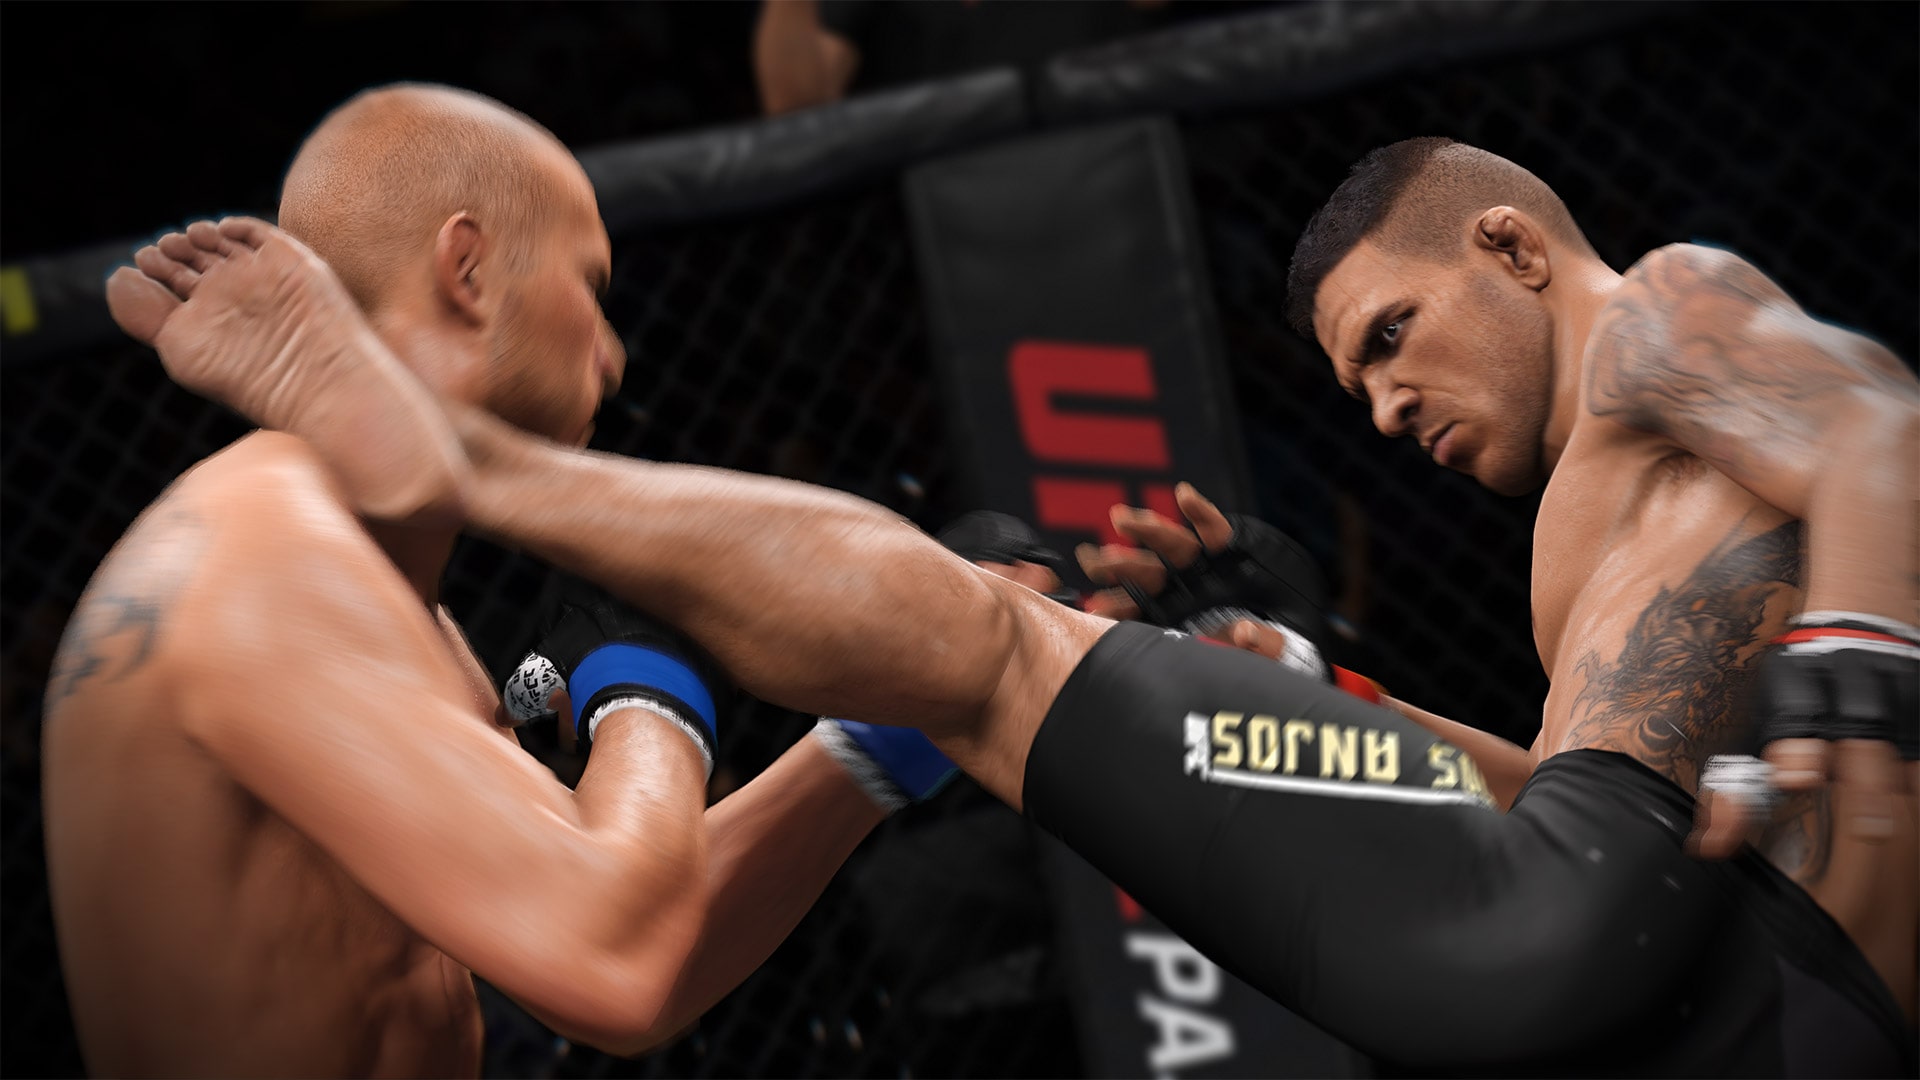 playstation store ufc 3